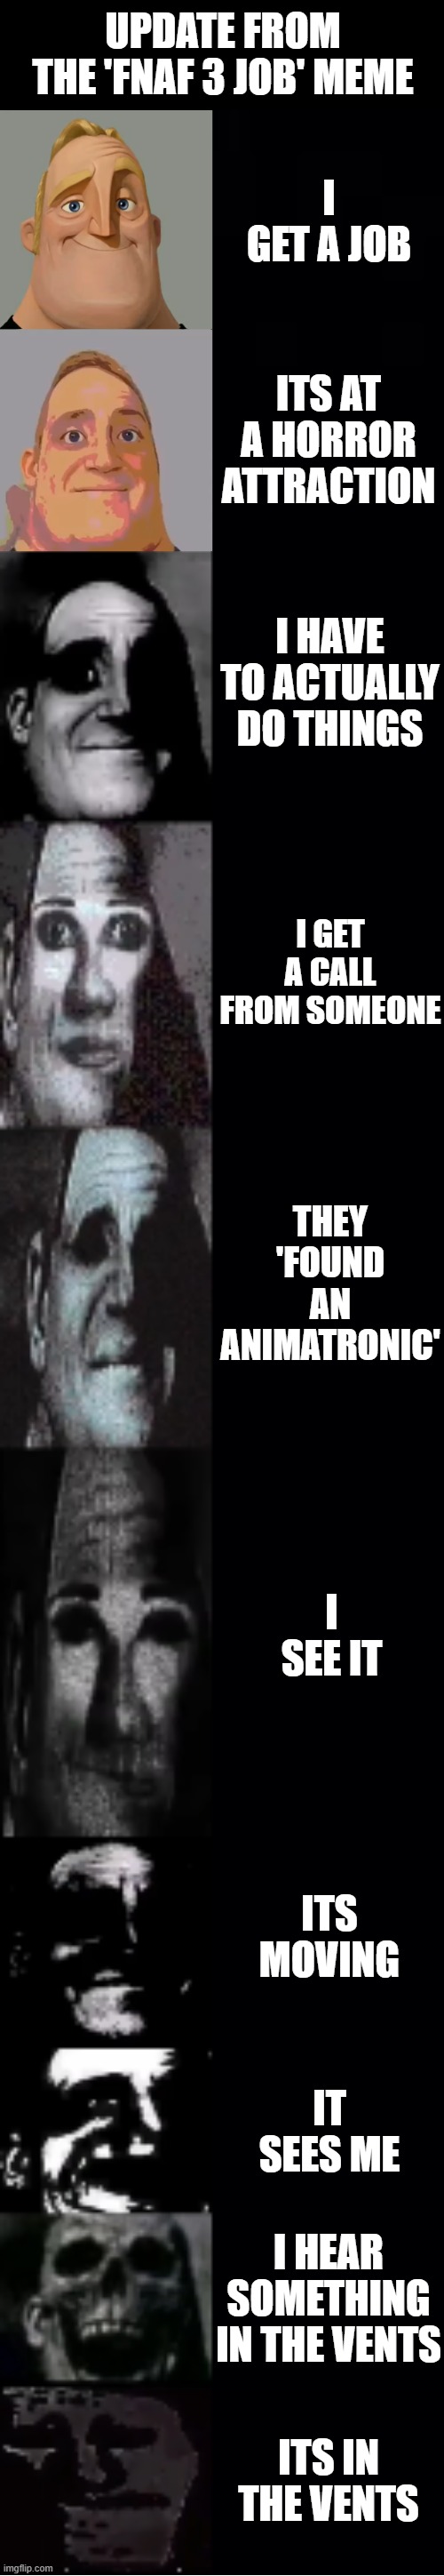 update from this meme https://imgflip.com/i/7oaakb | UPDATE FROM THE 'FNAF 3 JOB' MEME; I GET A JOB; ITS AT A HORROR ATTRACTION; I HAVE TO ACTUALLY DO THINGS; I GET A CALL FROM SOMEONE; THEY 'FOUND AN ANIMATRONIC'; I SEE IT; ITS MOVING; IT SEES ME; I HEAR SOMETHING IN THE VENTS; ITS IN THE VENTS | image tagged in mr incredible becoming uncanny,update,fnaf 3,fnaf3 | made w/ Imgflip meme maker